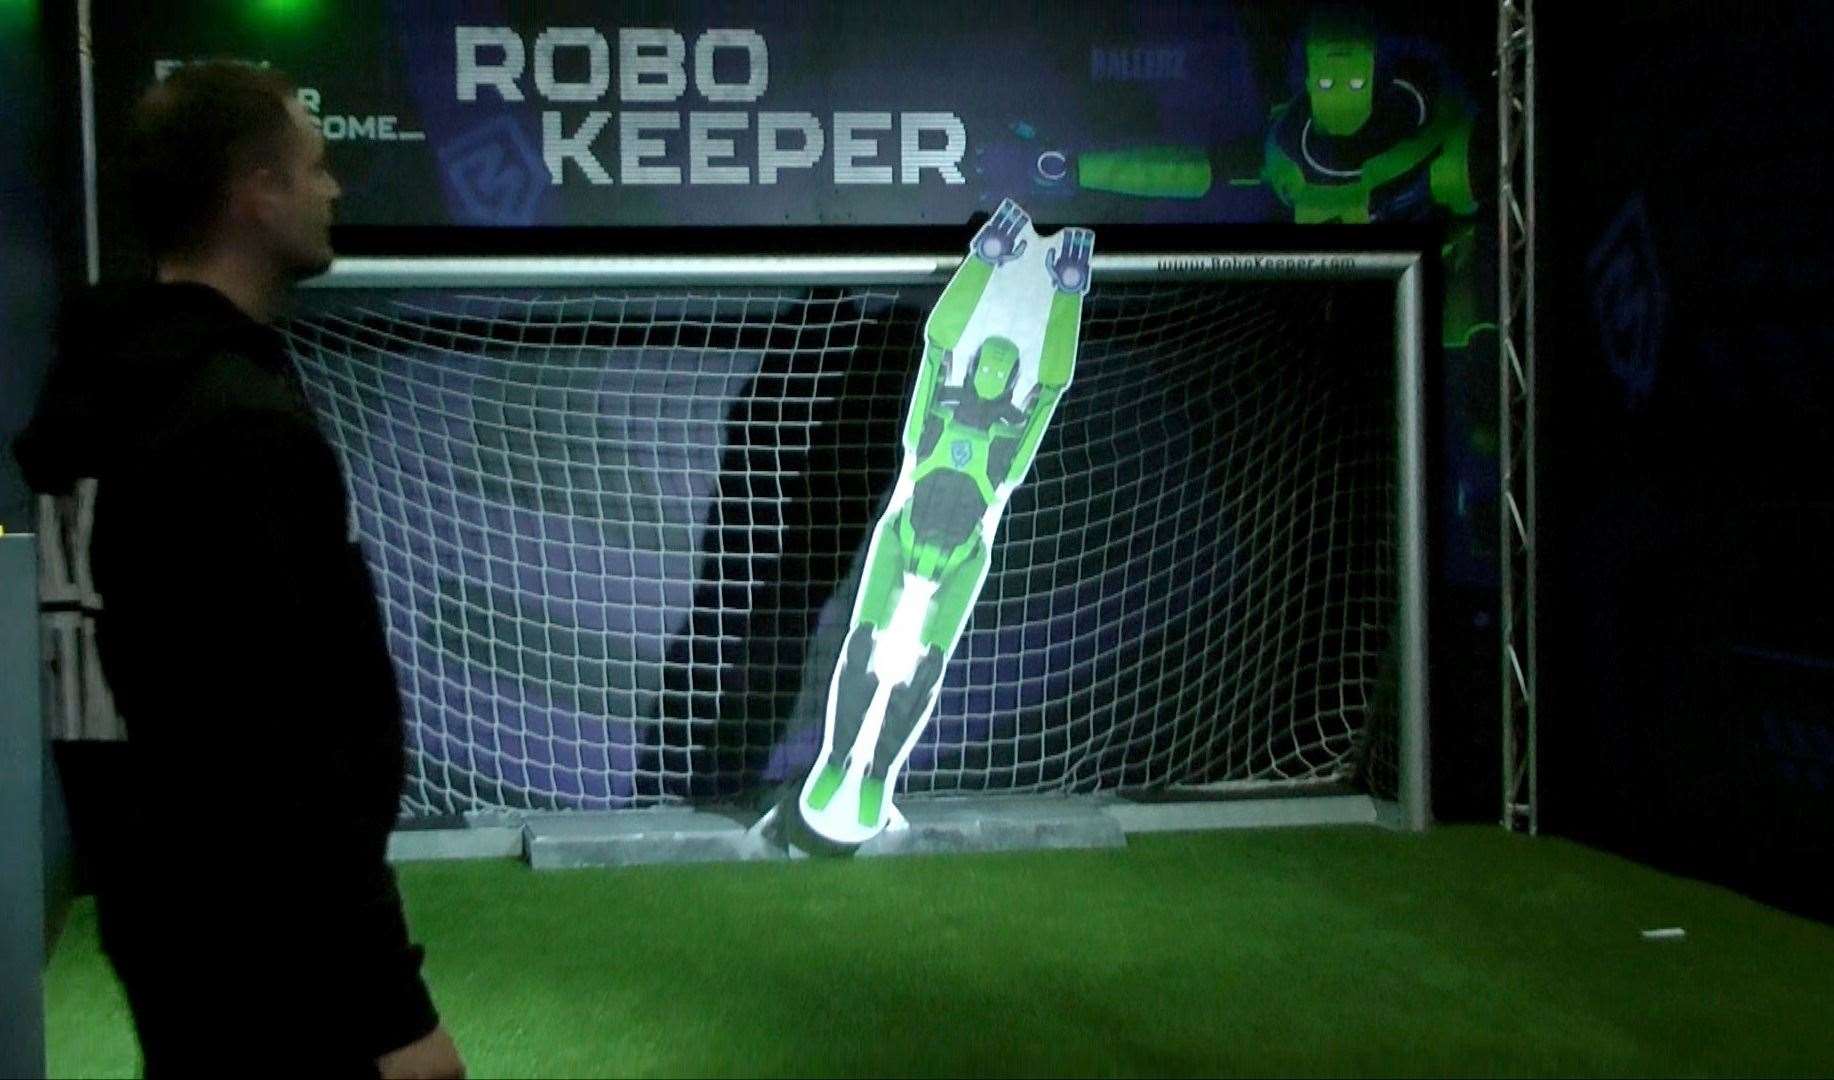 The dome offers different game modes such as a robo keeper